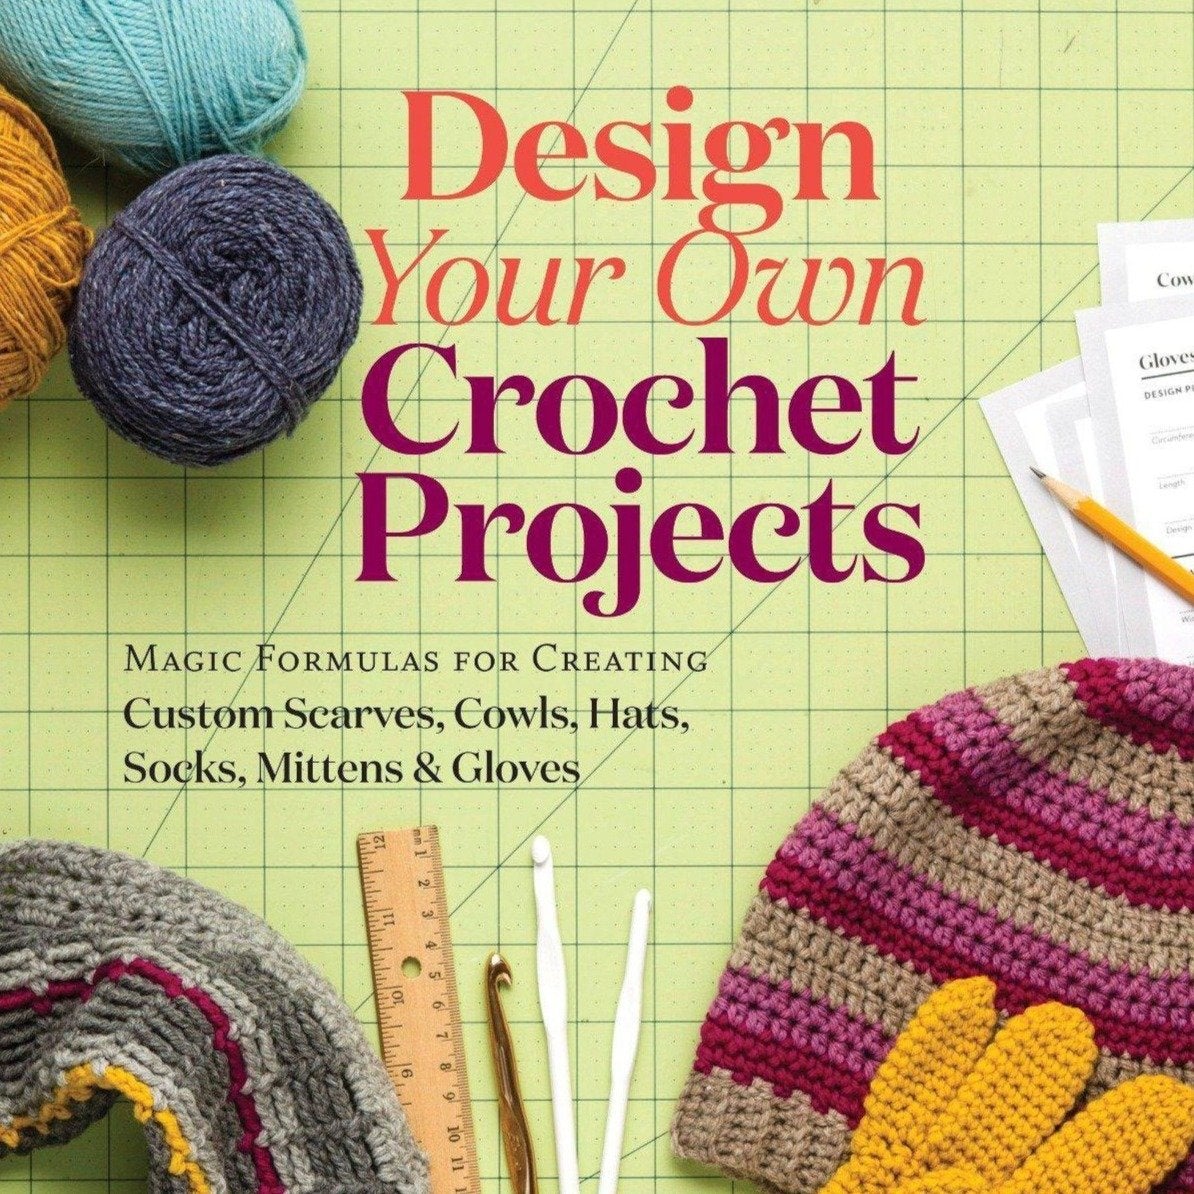 Storey Publishing-Design Your Own Crochet Projects-book-gather here online